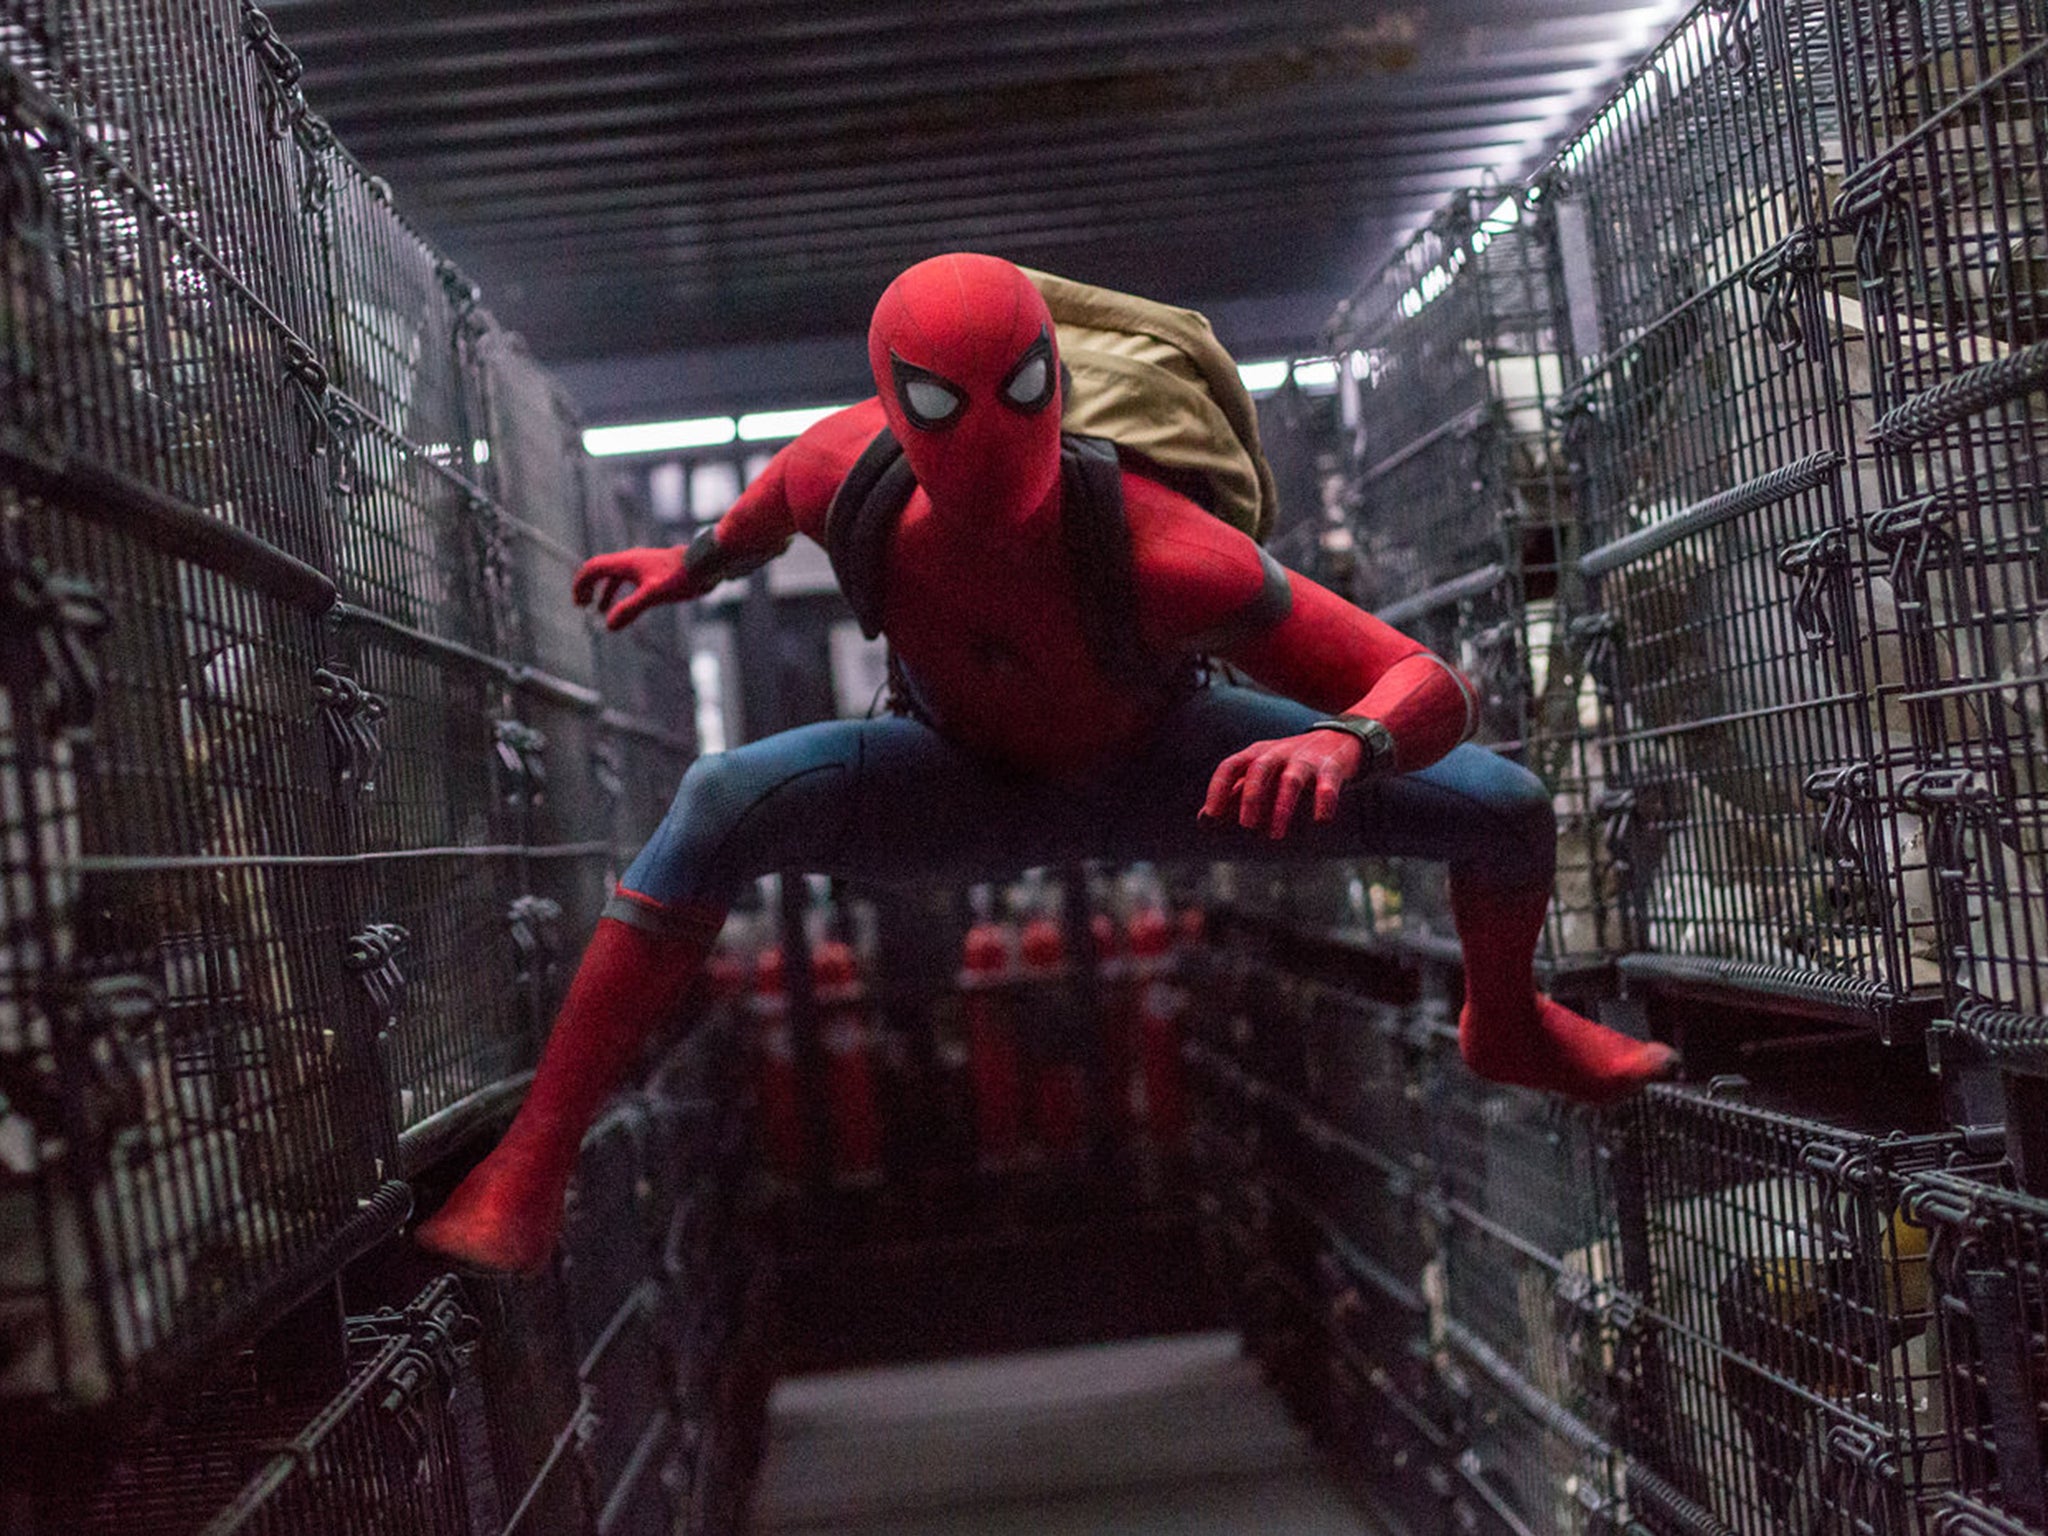 https://static.independent.co.uk/s3fs-public/thumbnails/image/2017/10/25/09/spider-man-homecoming.jpg